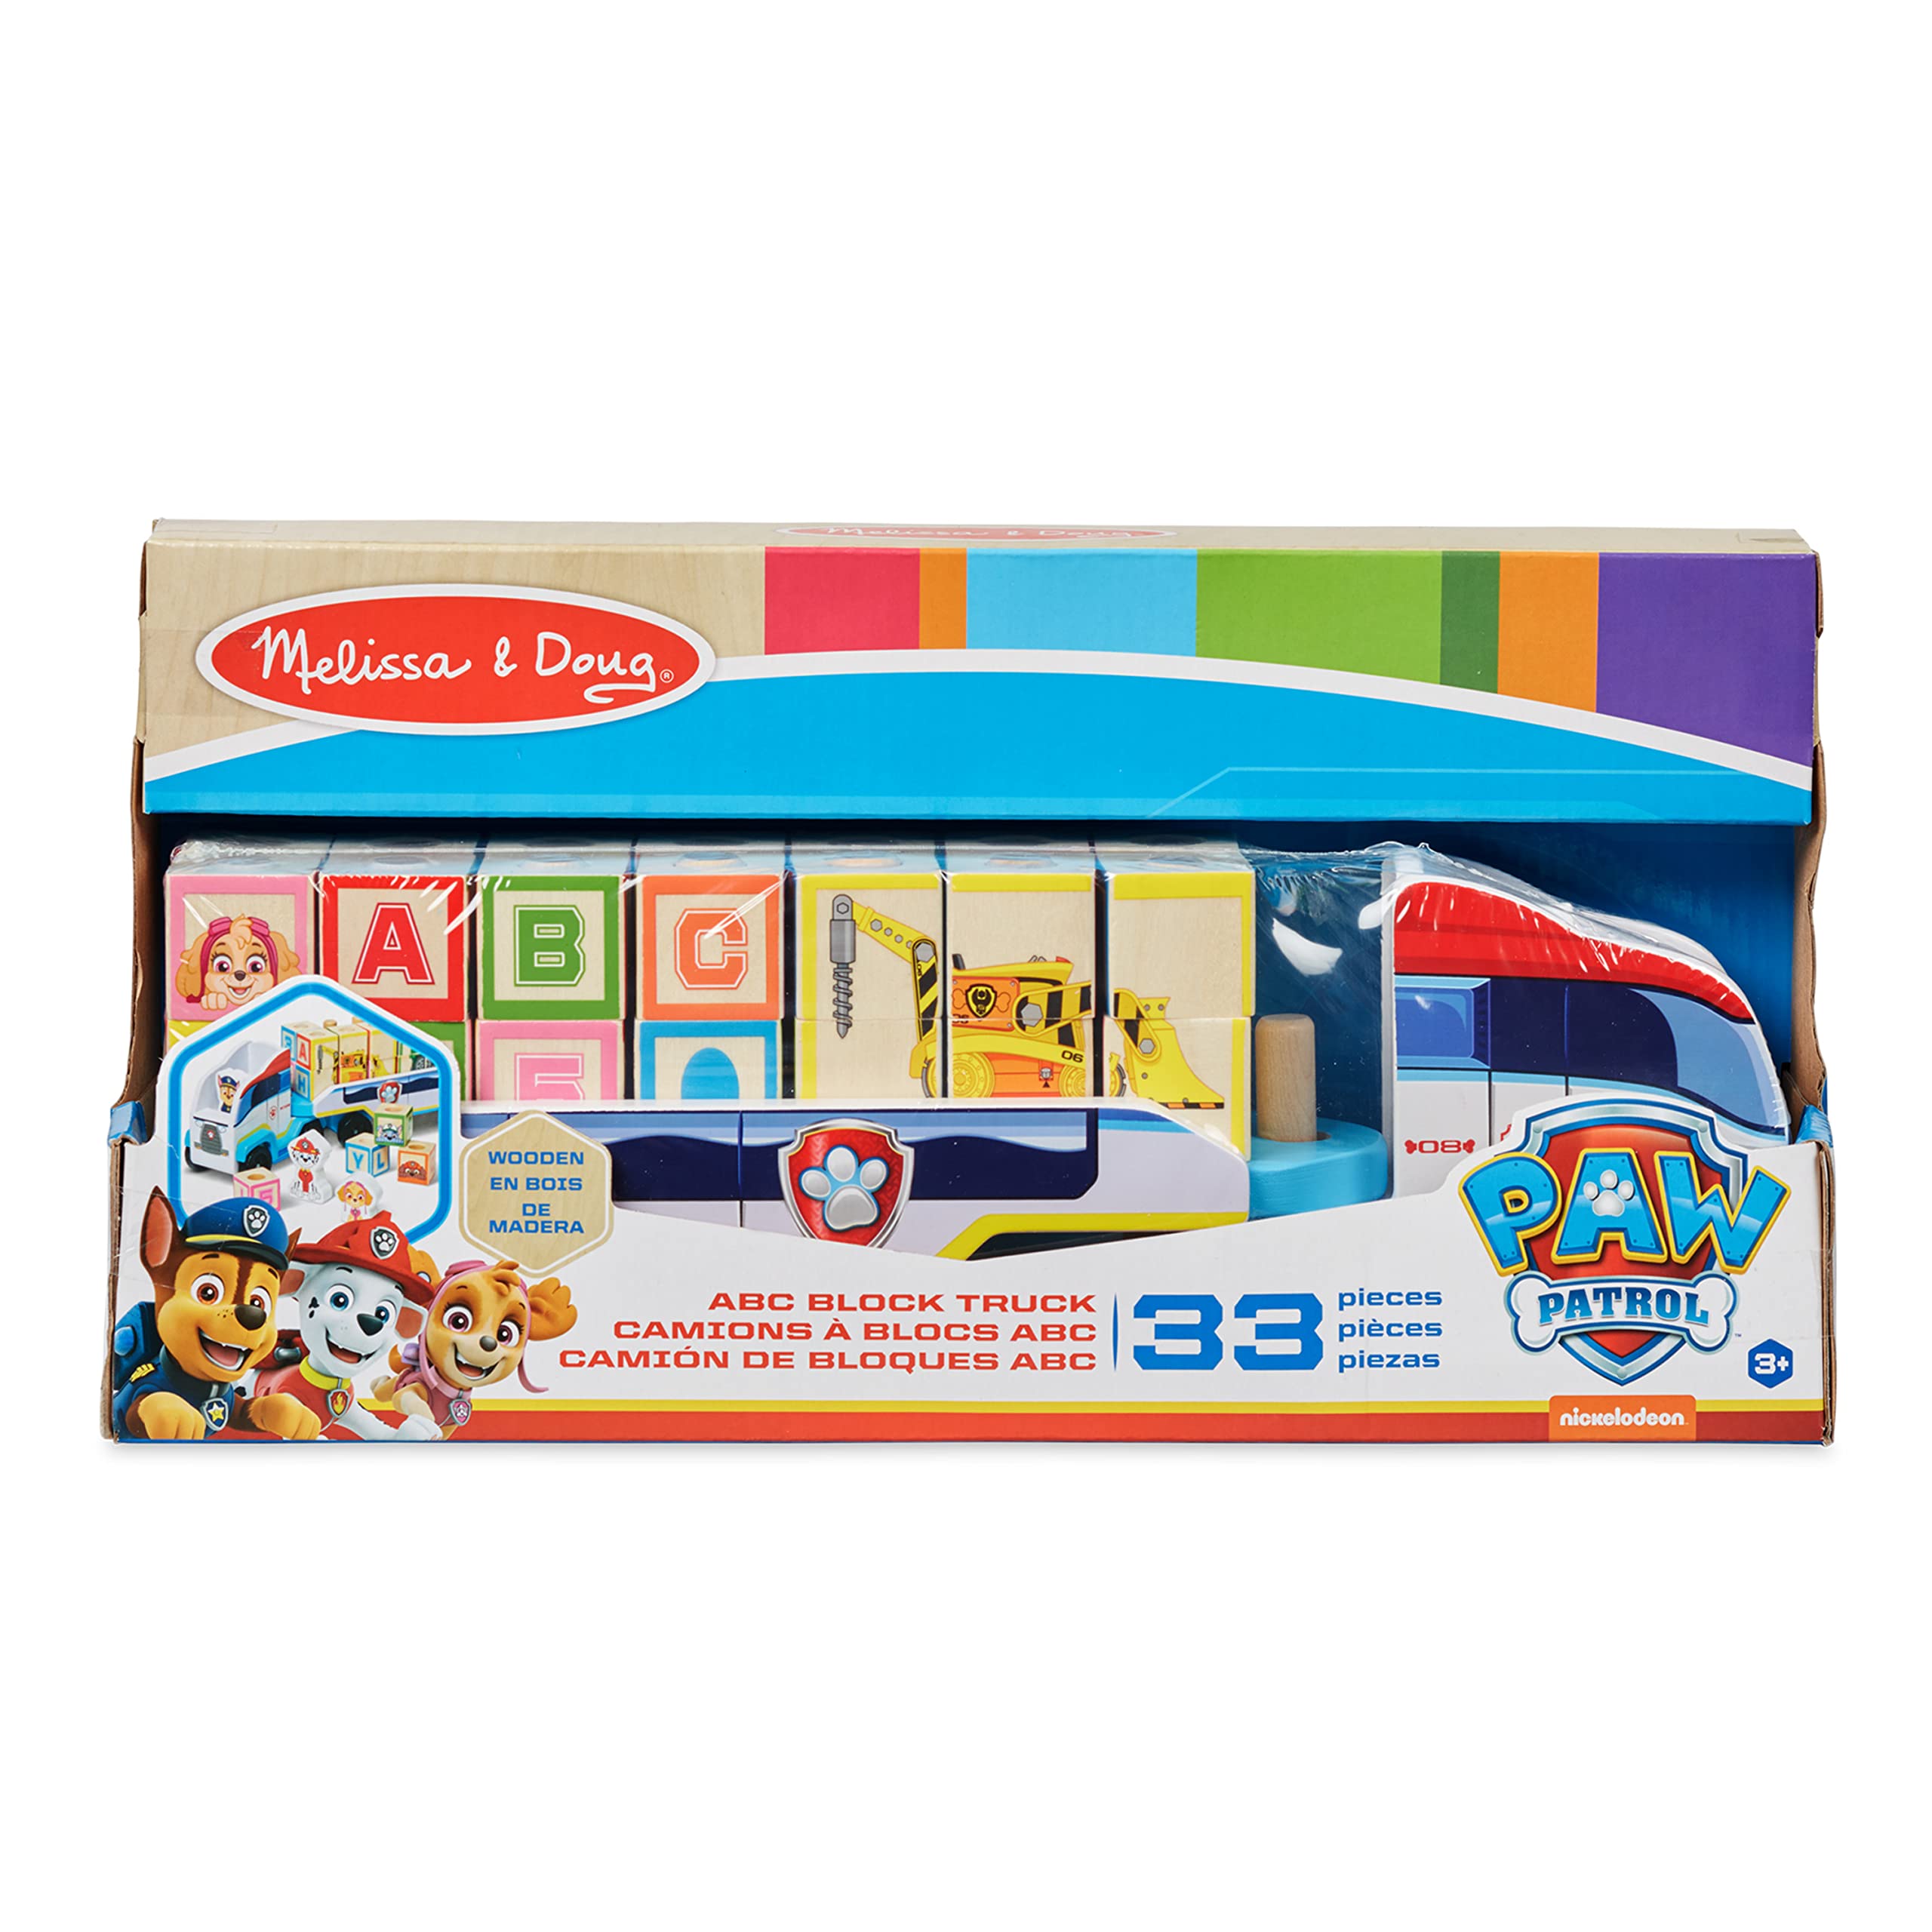 Melissa & Doug PAW Patrol Wooden ABC Block Truck (33 Pieces) - Sort And Stack Toys, Alphabet Blocks For Toddlers, Vehicle Toys For Kids Ages 3+